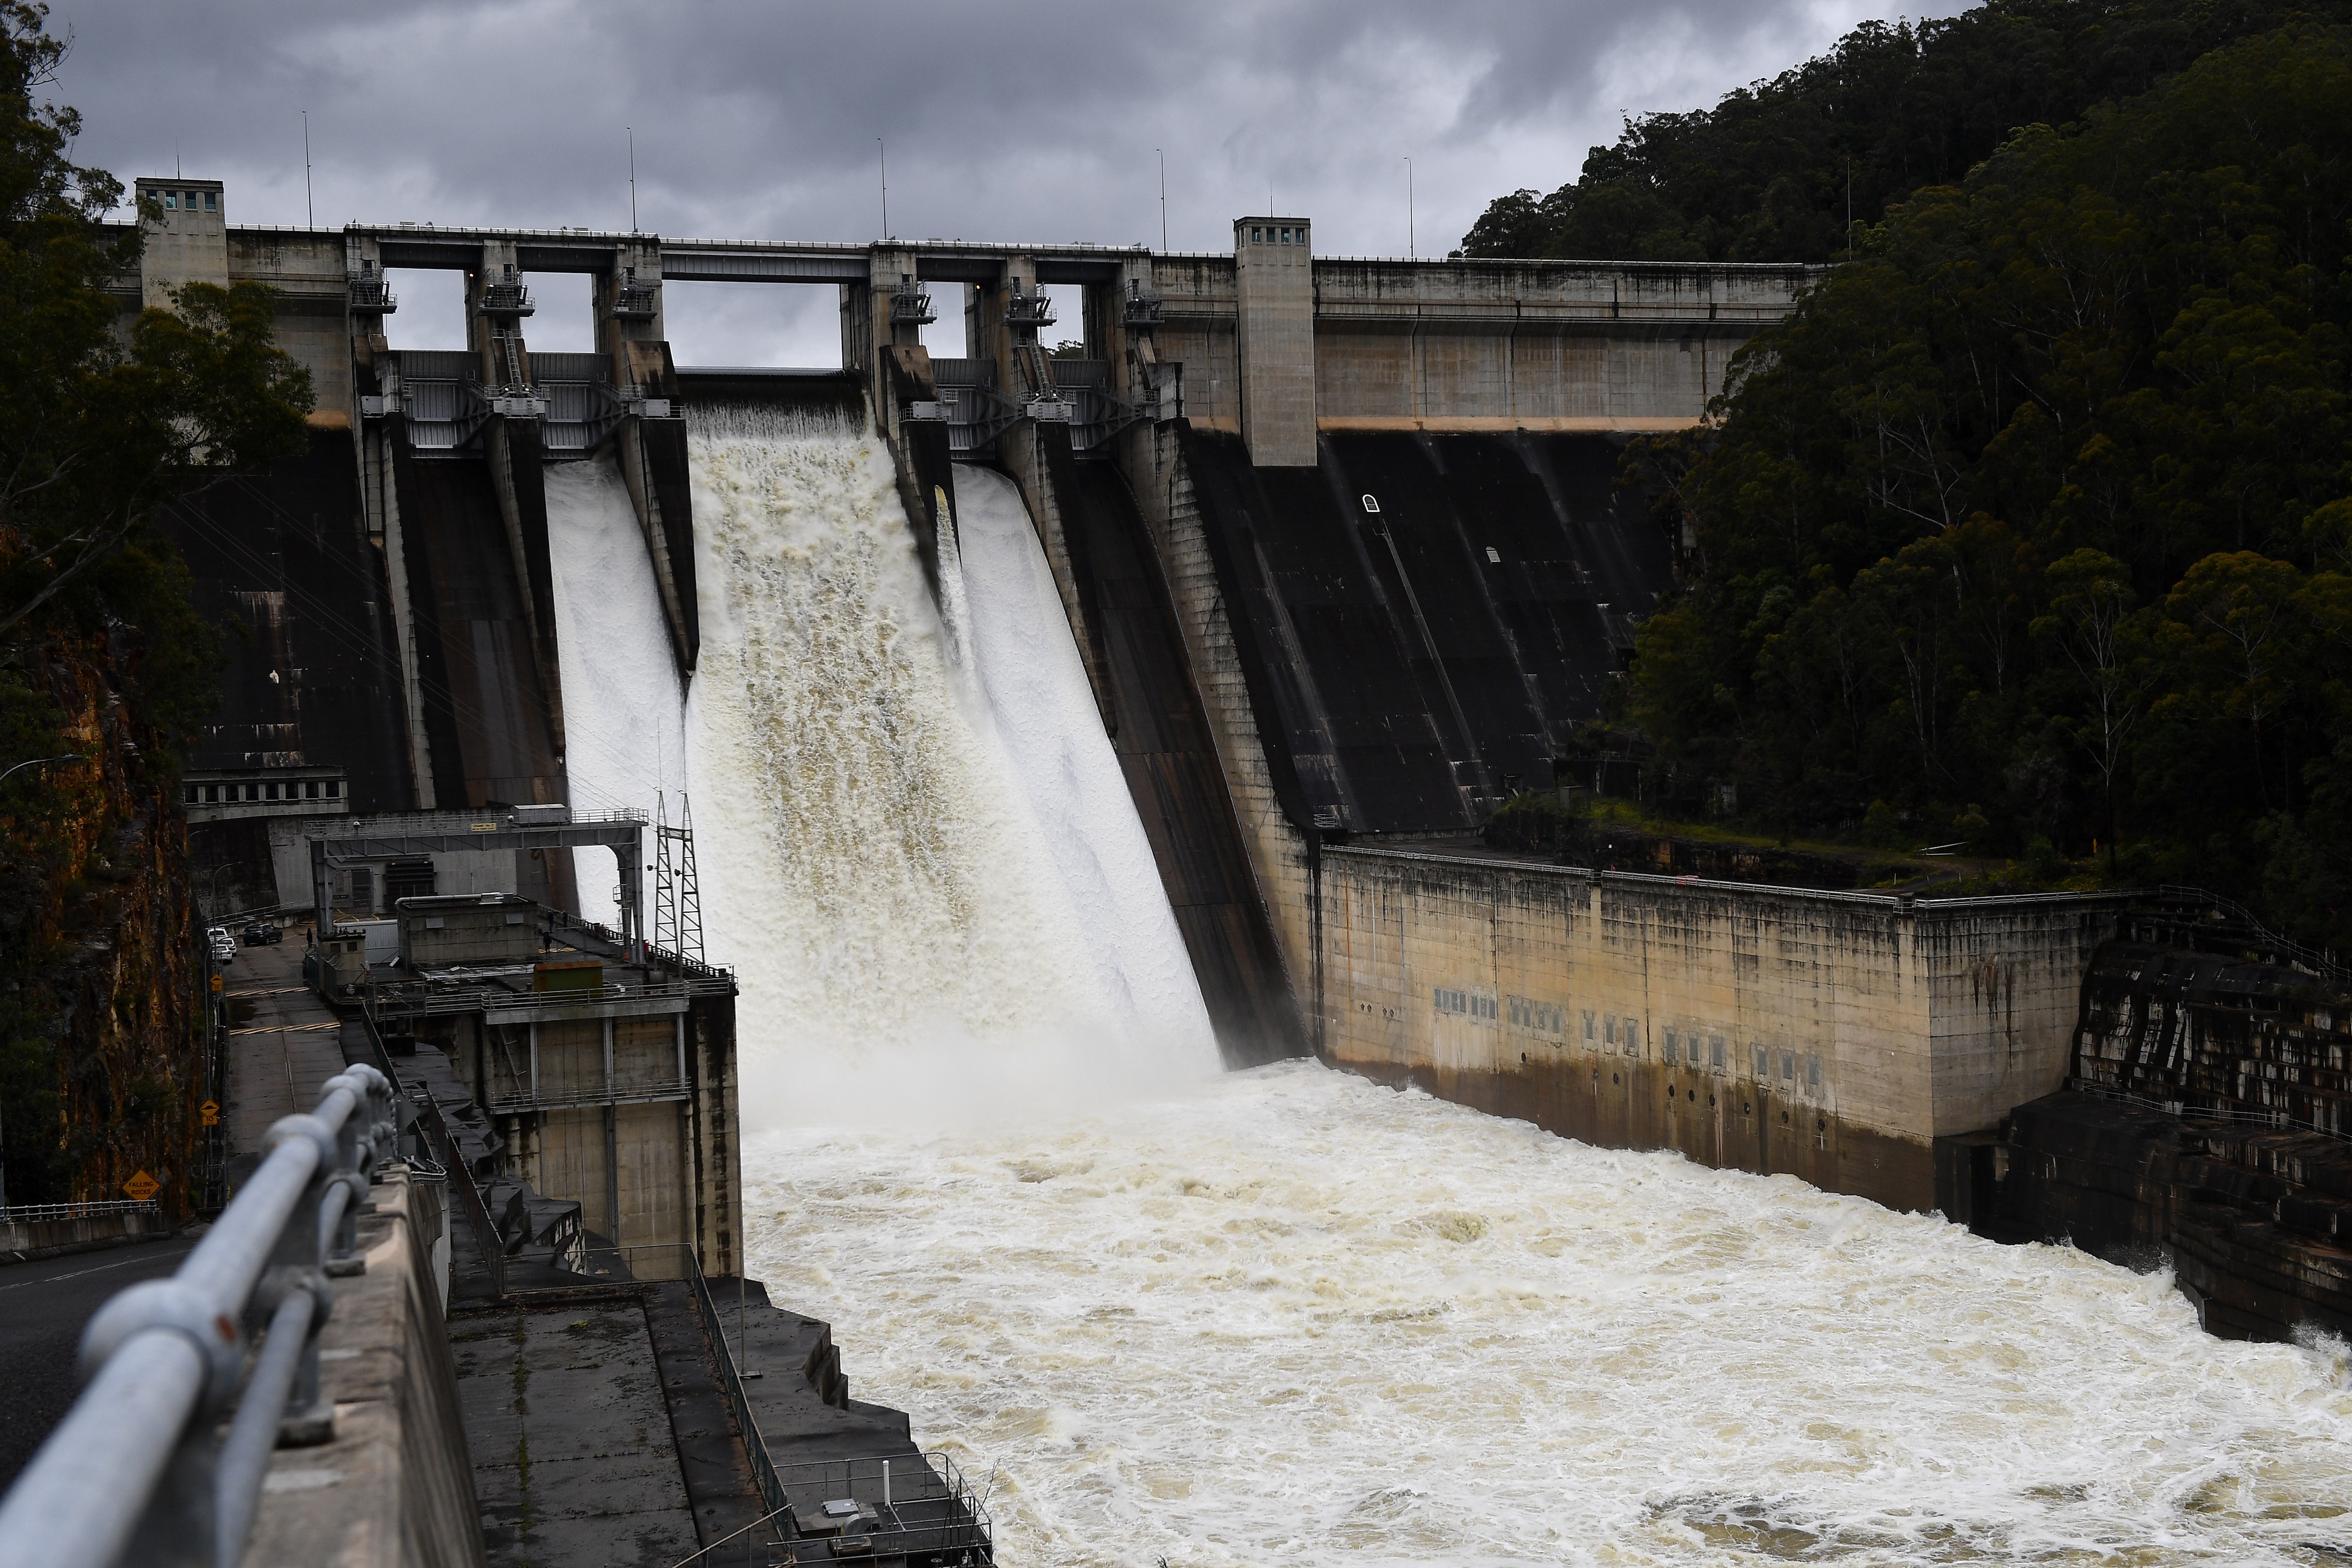 Sydney's Warragamba Dam spillway outflow could peak as the flood crisis continues across NSW.